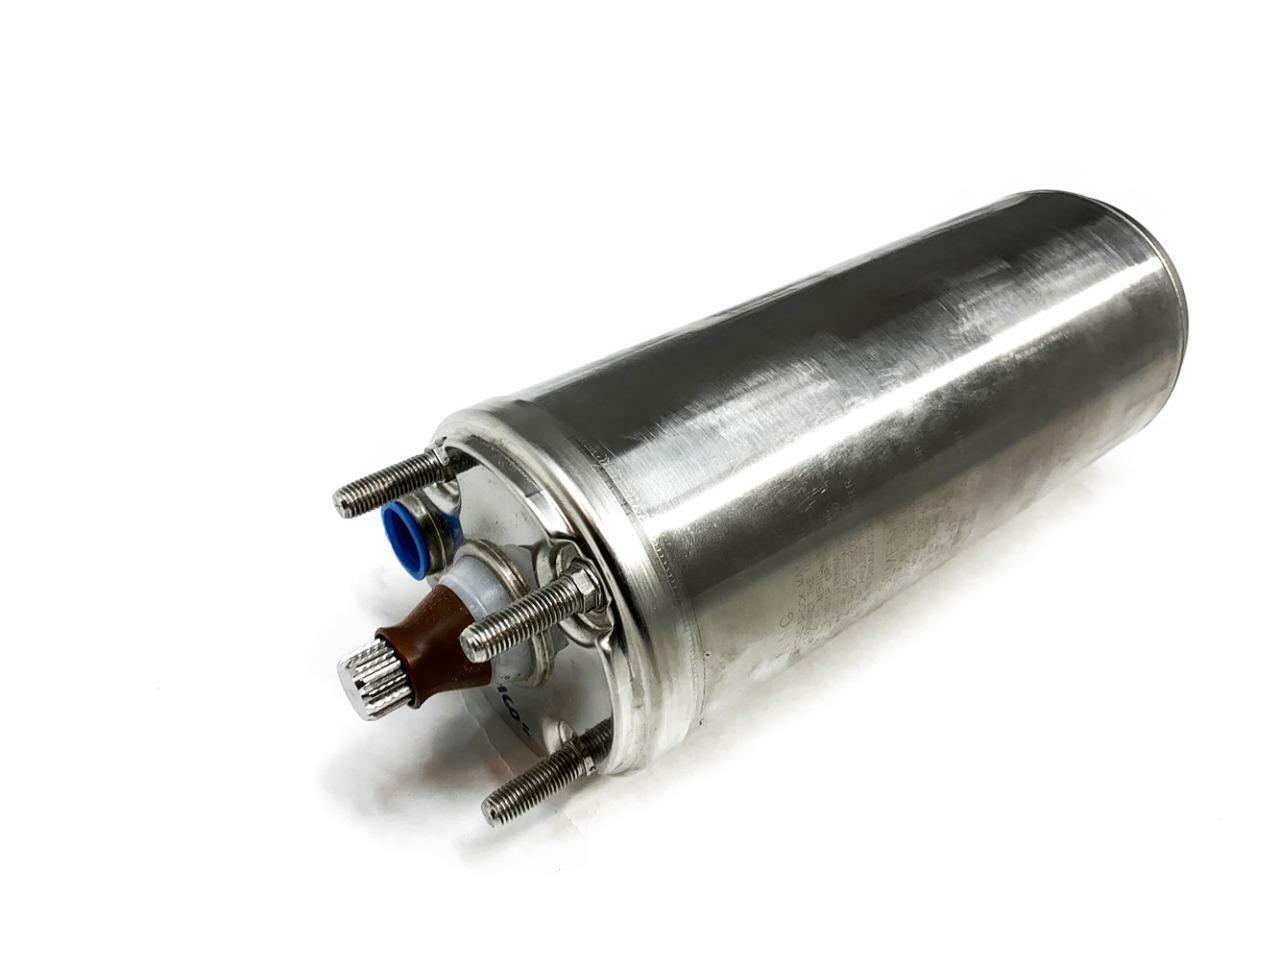 Franklin Electric 2445050917G Submersible Motor FREE FAST SHIP